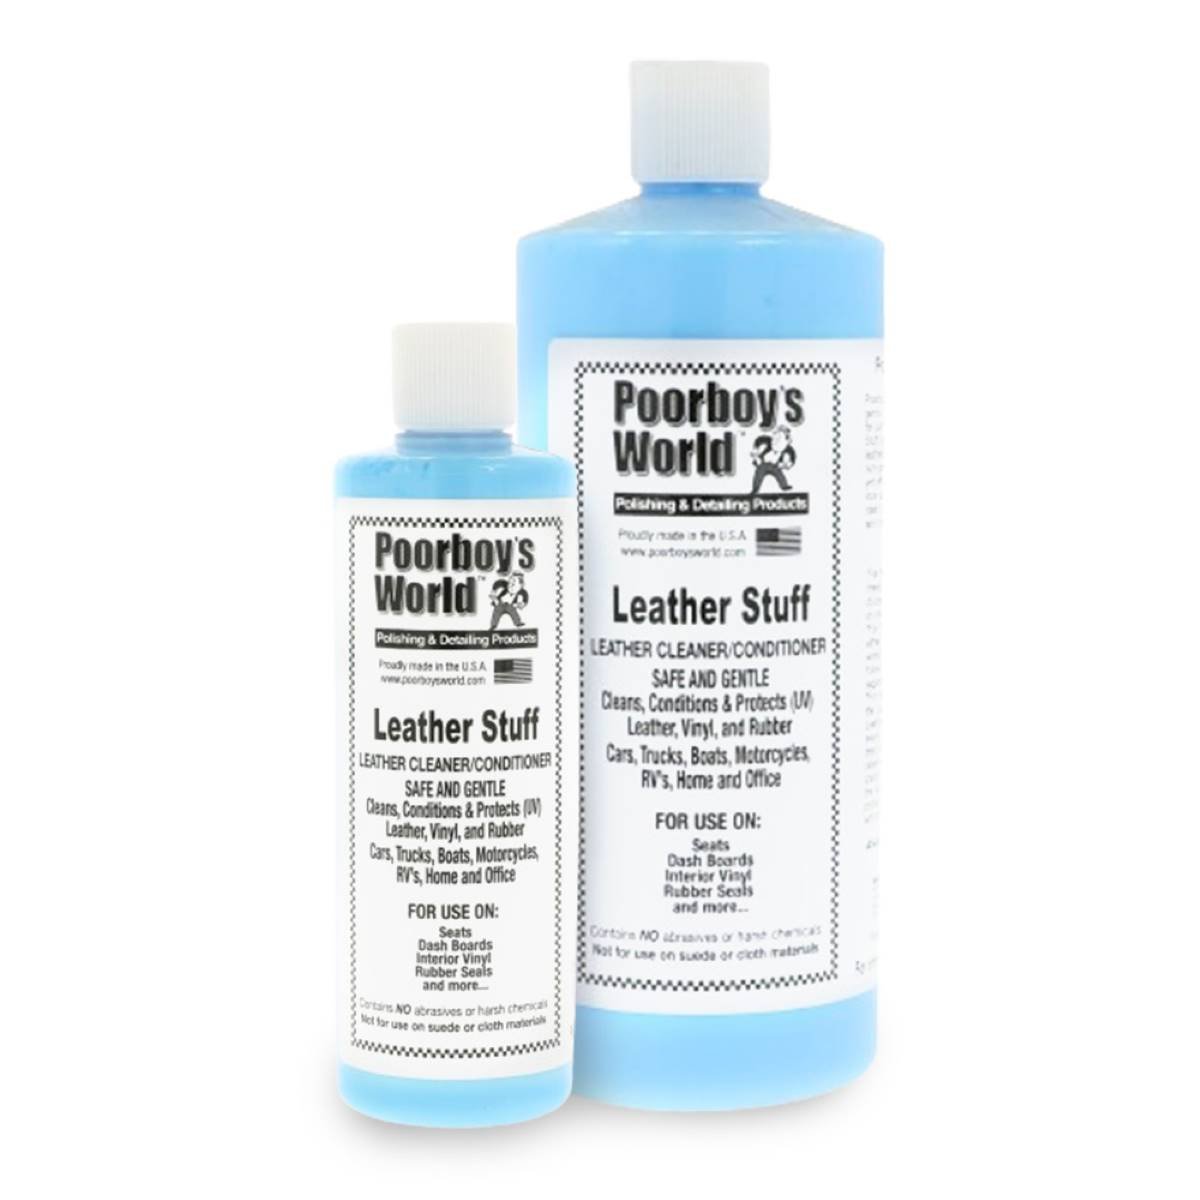 Leather Stuff - Leather Cleaner and Conditioner